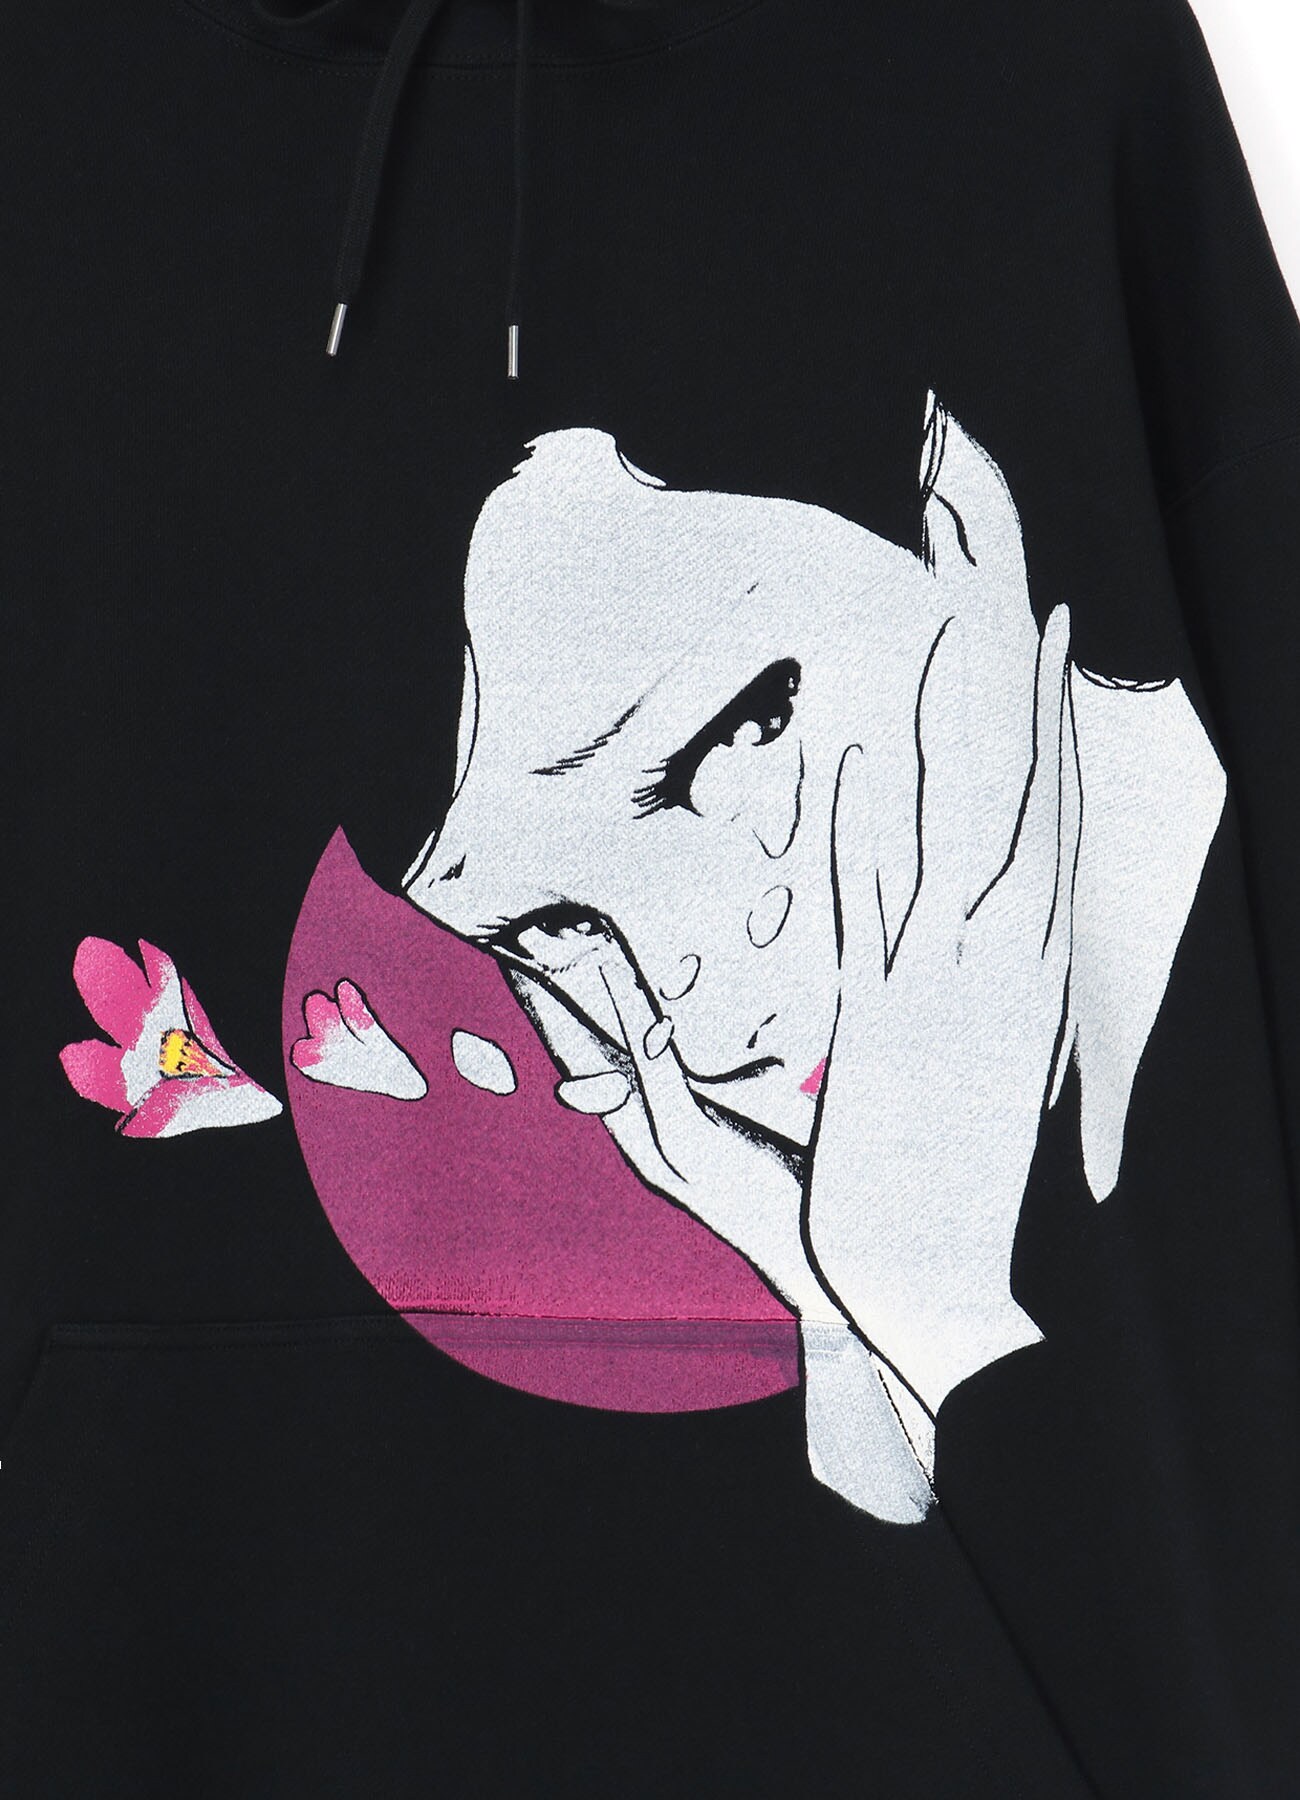 S'YTE x KAZUO KAMIMURA-同棲時代-FRENCH TERRY HOODIE WITH PRINTED ILLUSTRATION